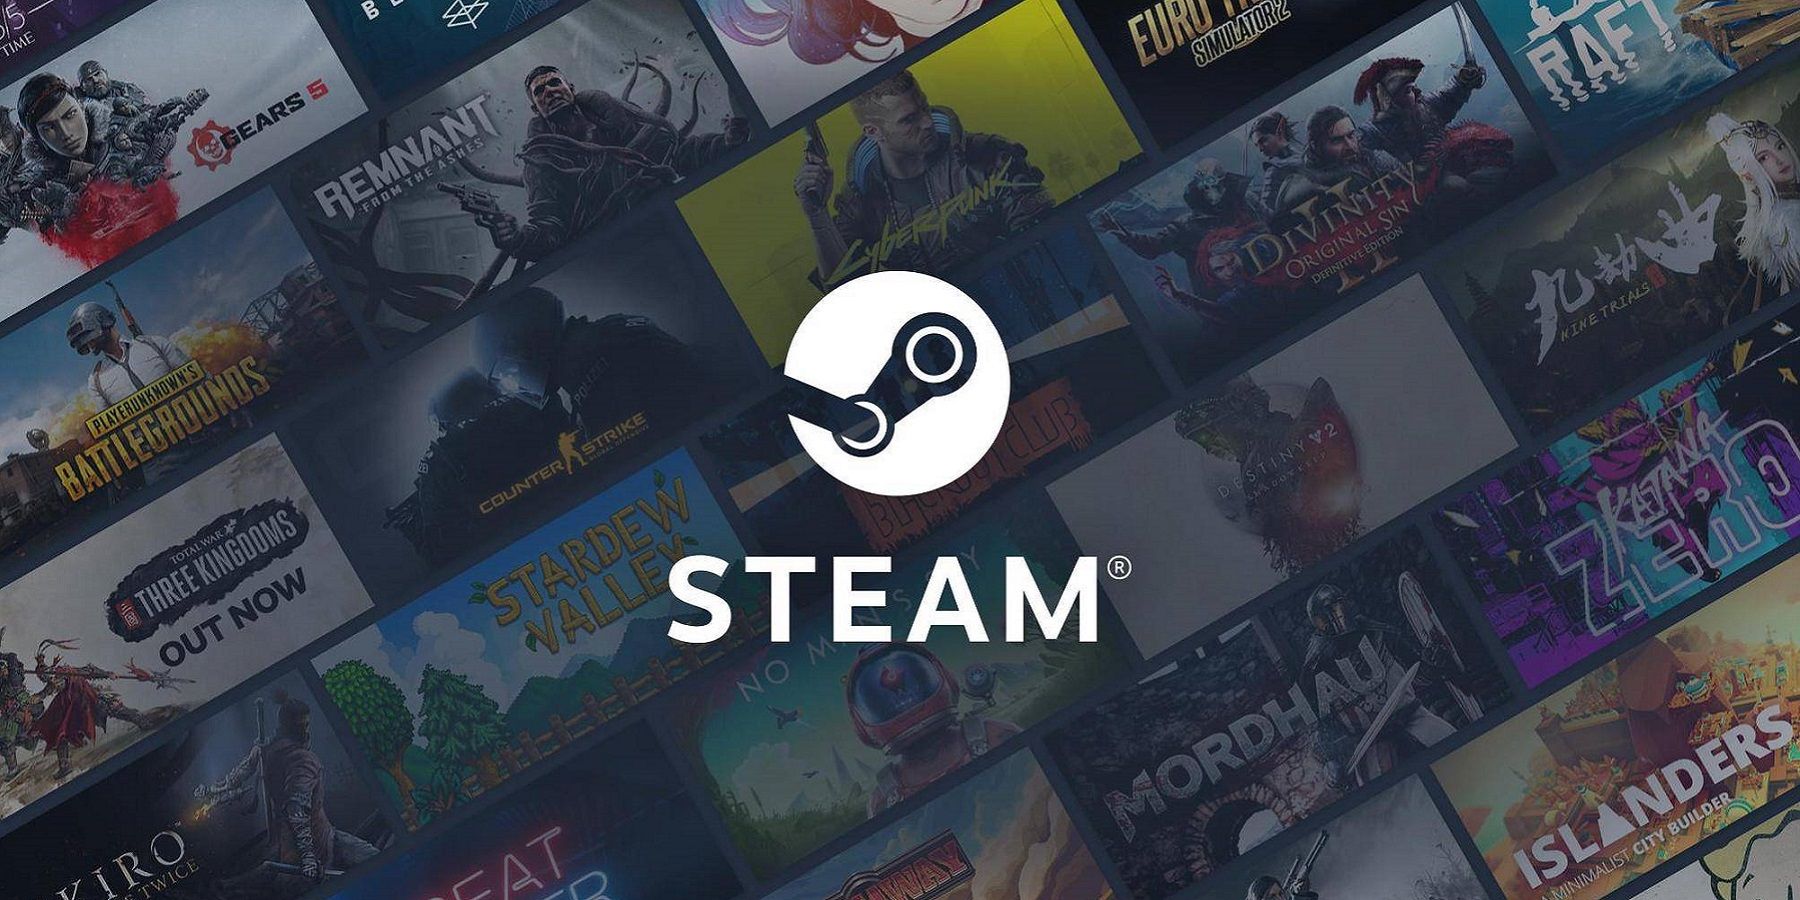 Image showing the Steam logo with many game covers in the background.